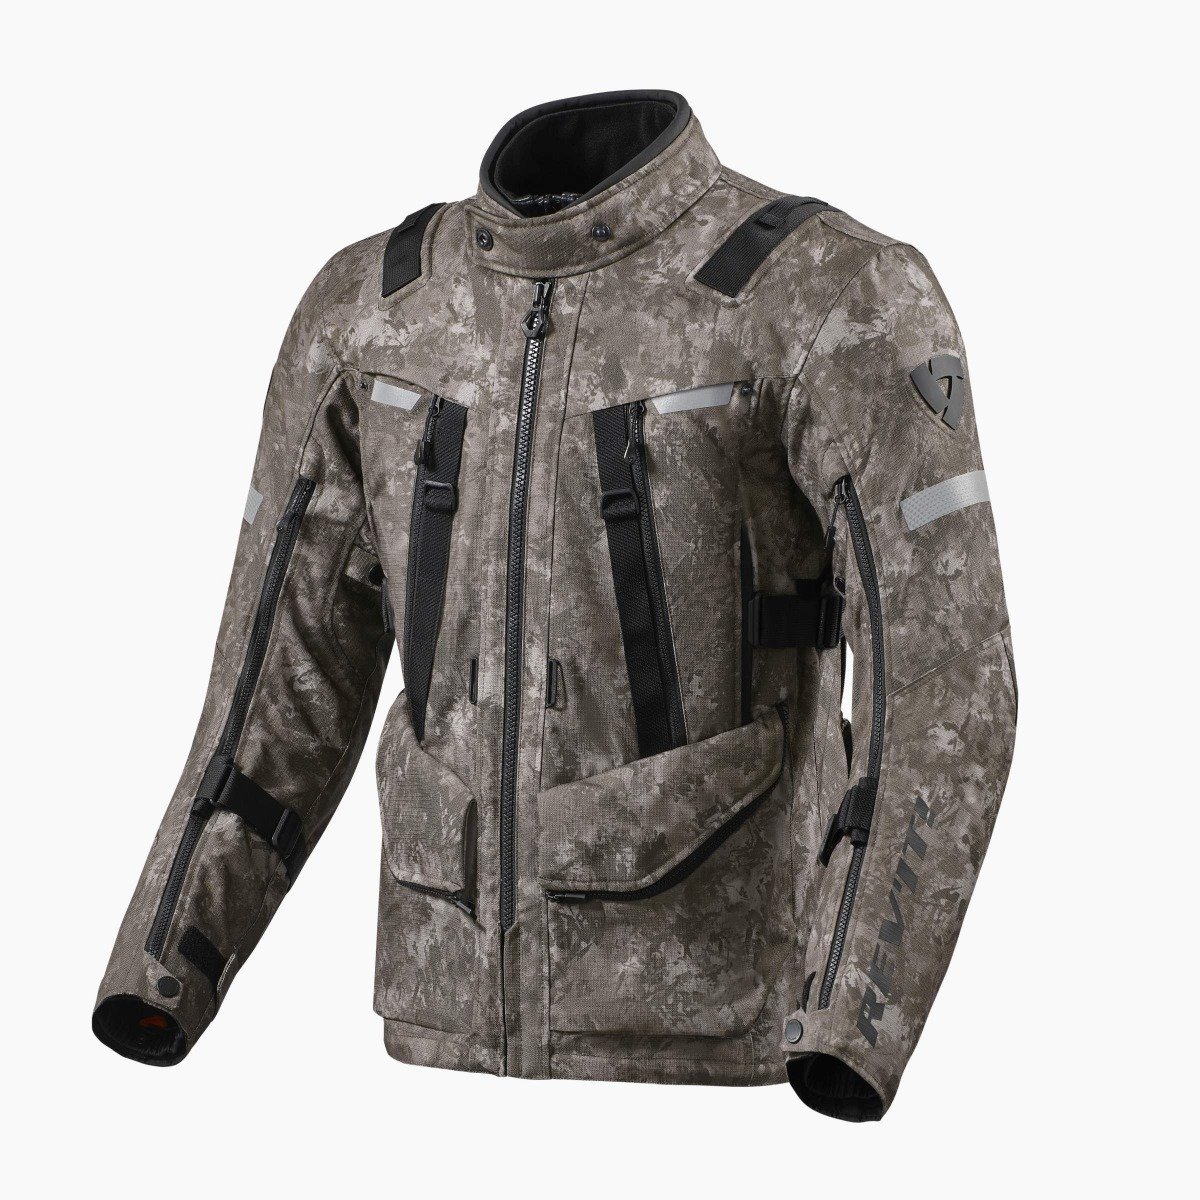 Image of REV'IT! Sand 4 H2O Jacket Camo Brown Size XL ID 8700001311403